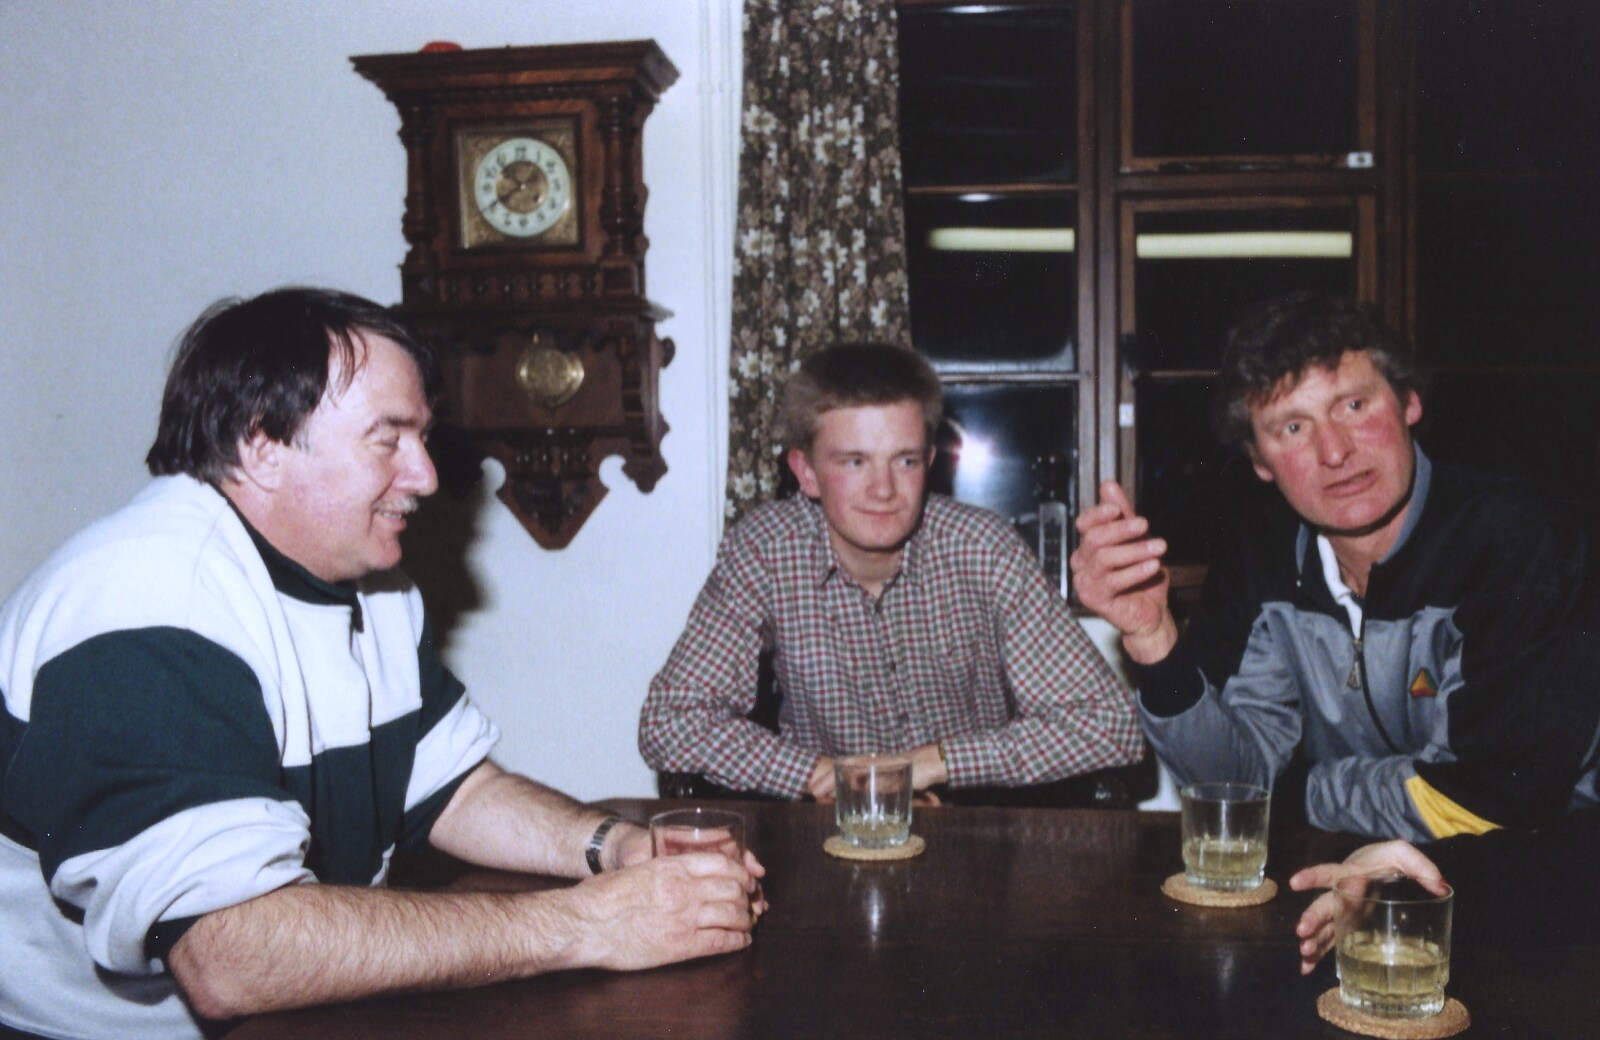 Corky, Nosher and Geoff, and cider from A Mediaeval Birthday Party, Starston, Norfolk - 27th July 1990